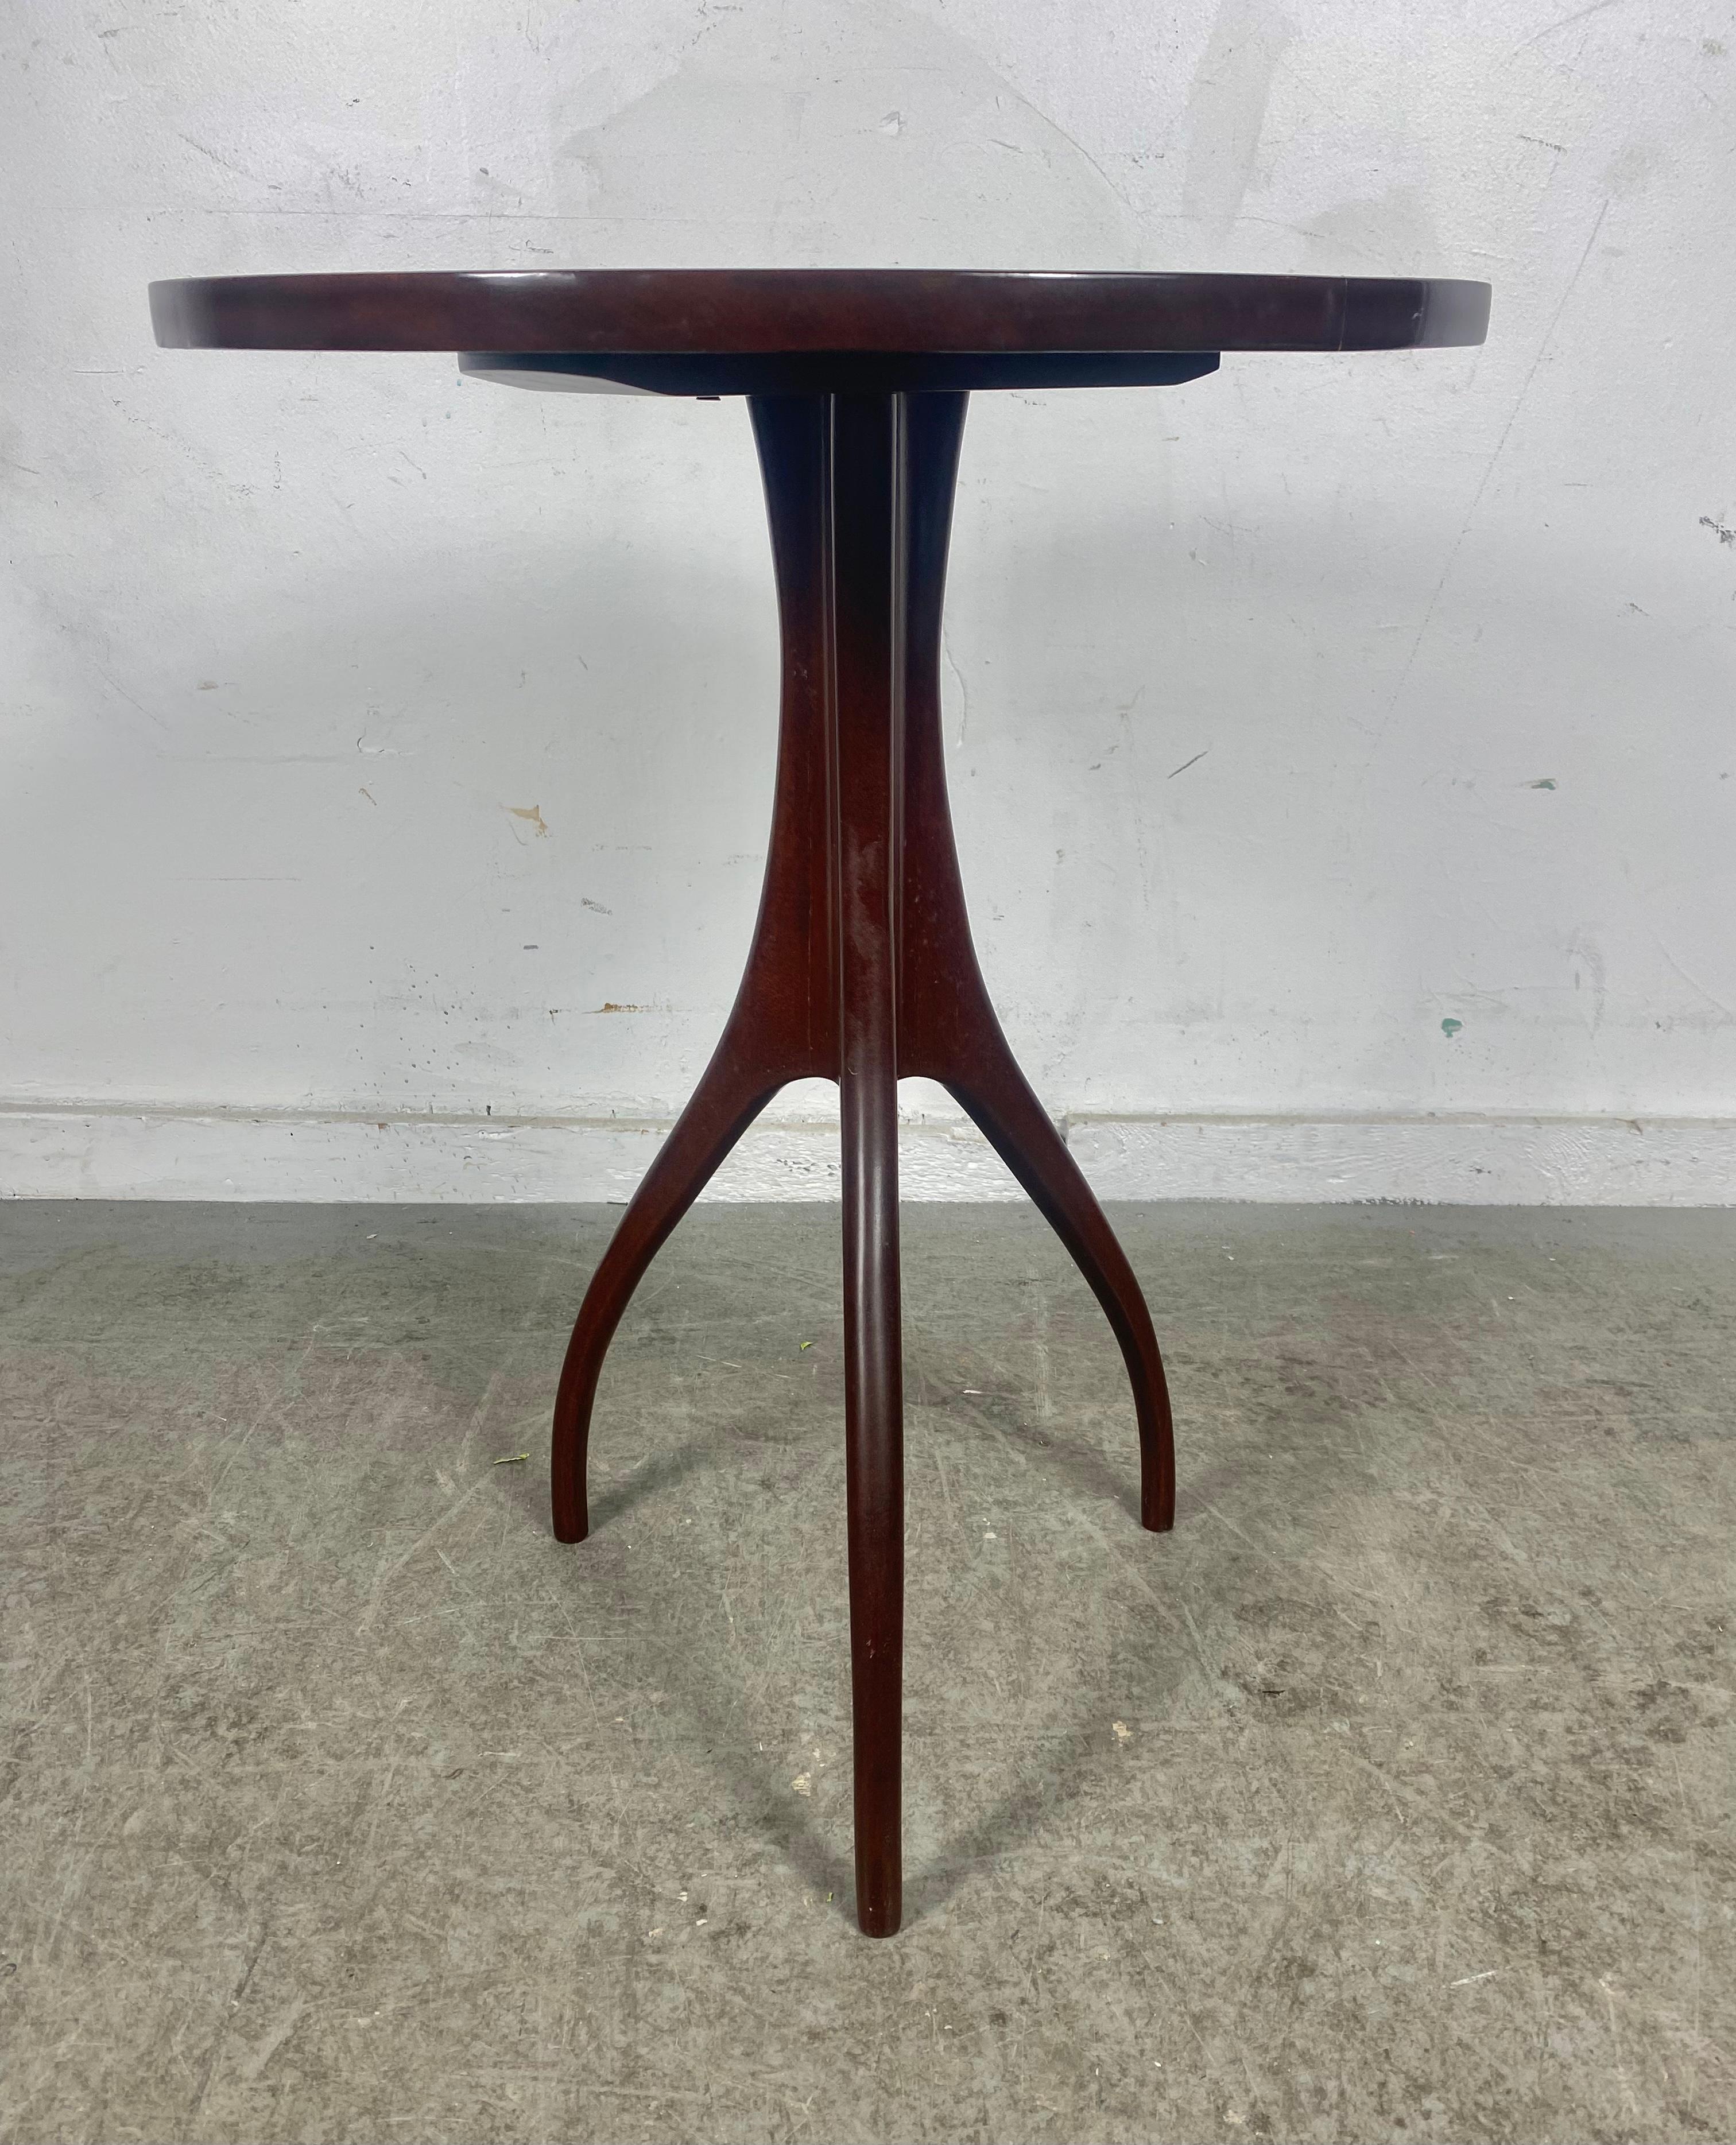 American Stylish Midcentury Mahogany Tripod Lamp Table / Stand Attrib to Edward Wormley For Sale